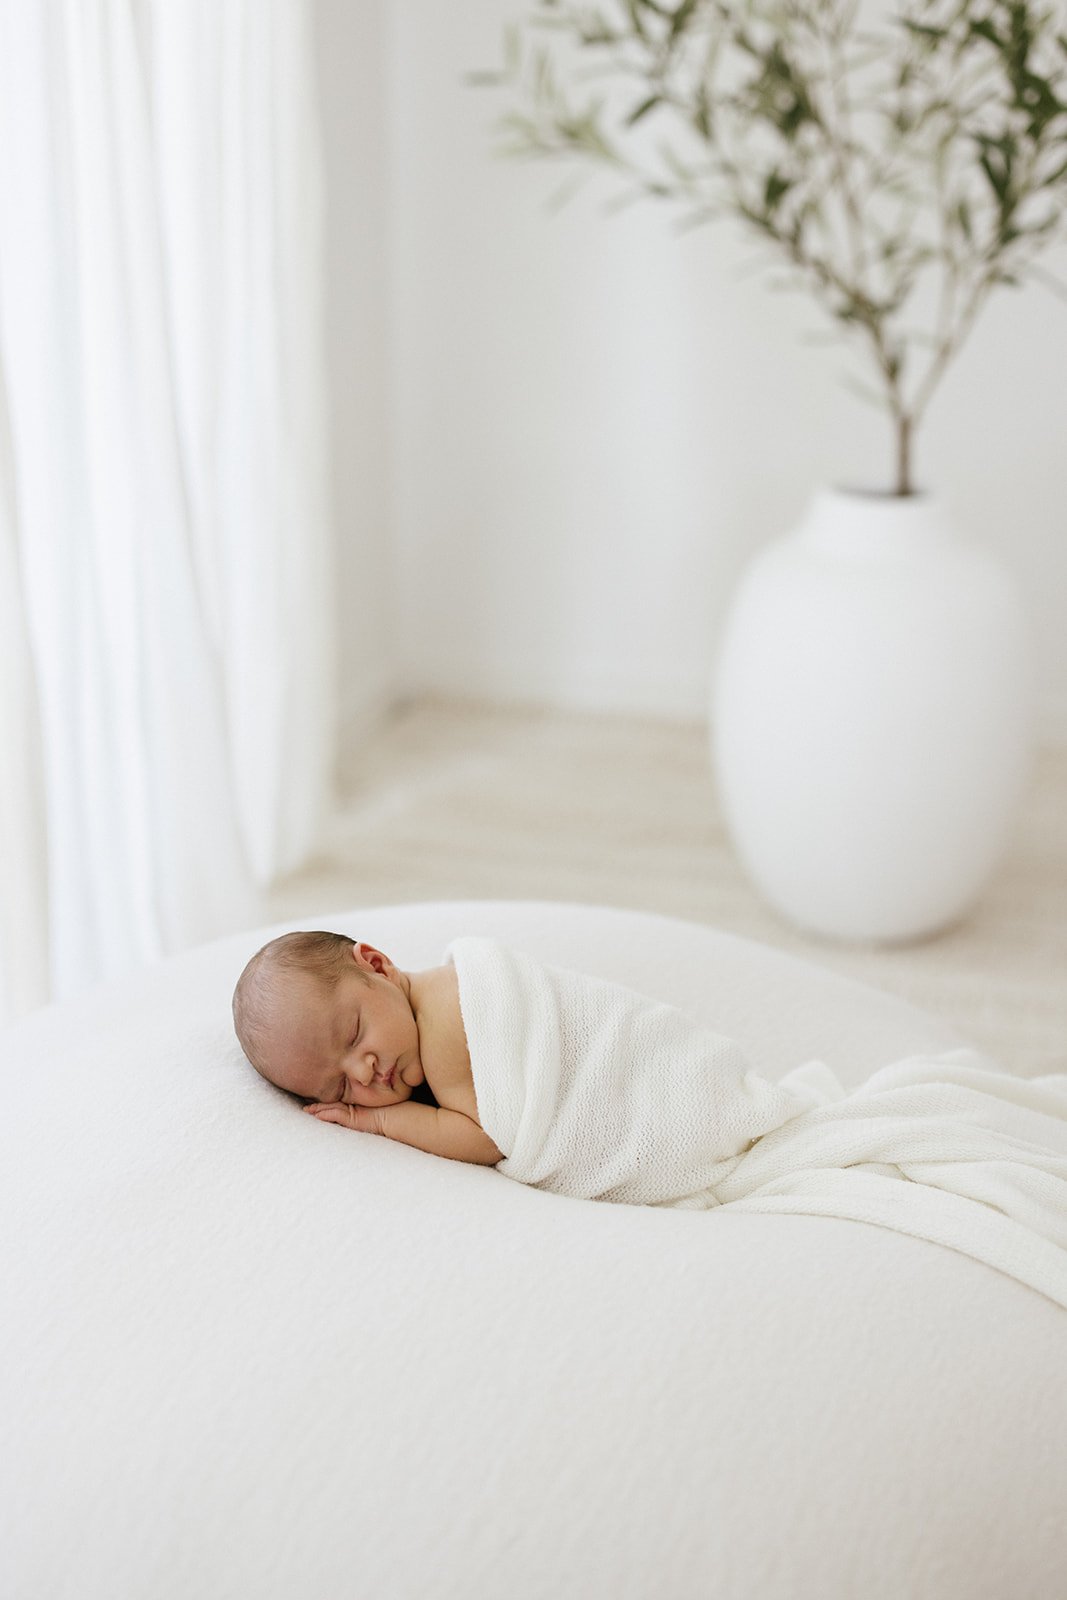  newborn baby wrapped in a white blanket laying in front of a olive tree pot 